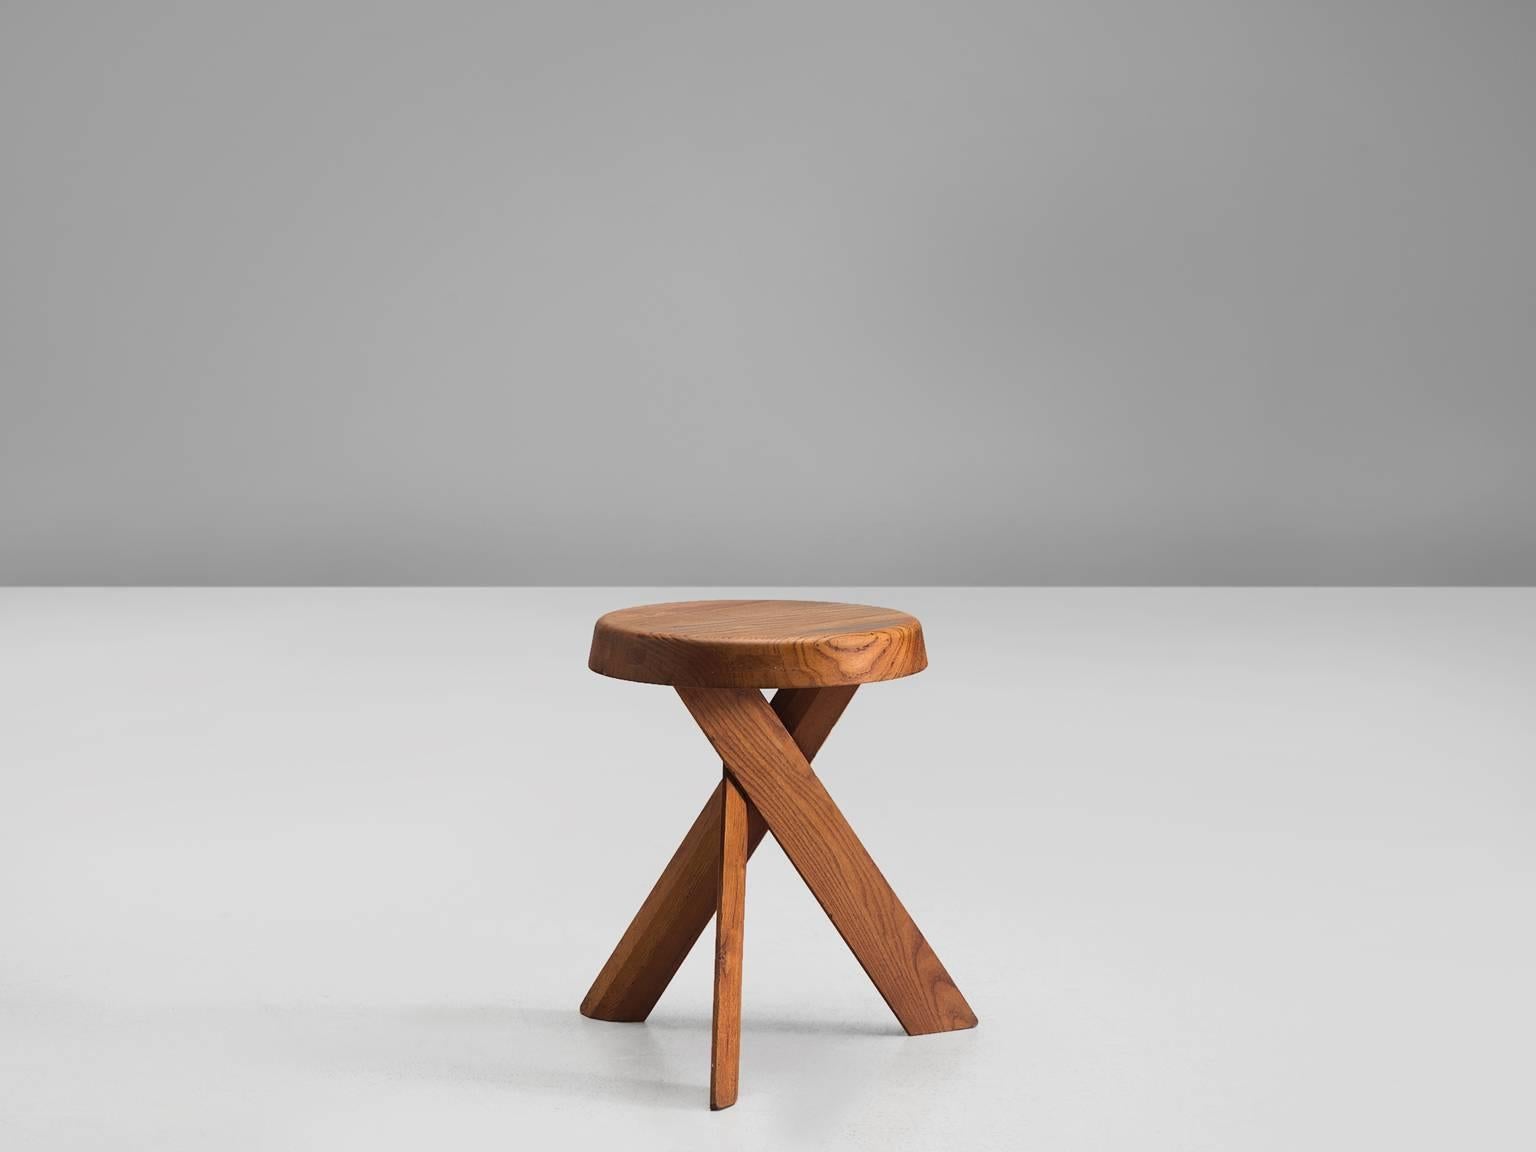 Stool S31, in elm by Pierre Chapo, France, 1960s.

This asymmetrical stool with twisted is an icon of Pierre Chapo's playful and solemn, solid designs. The piece is made of solid elm and shows the characteristics of Pierre Chapo. First of all the